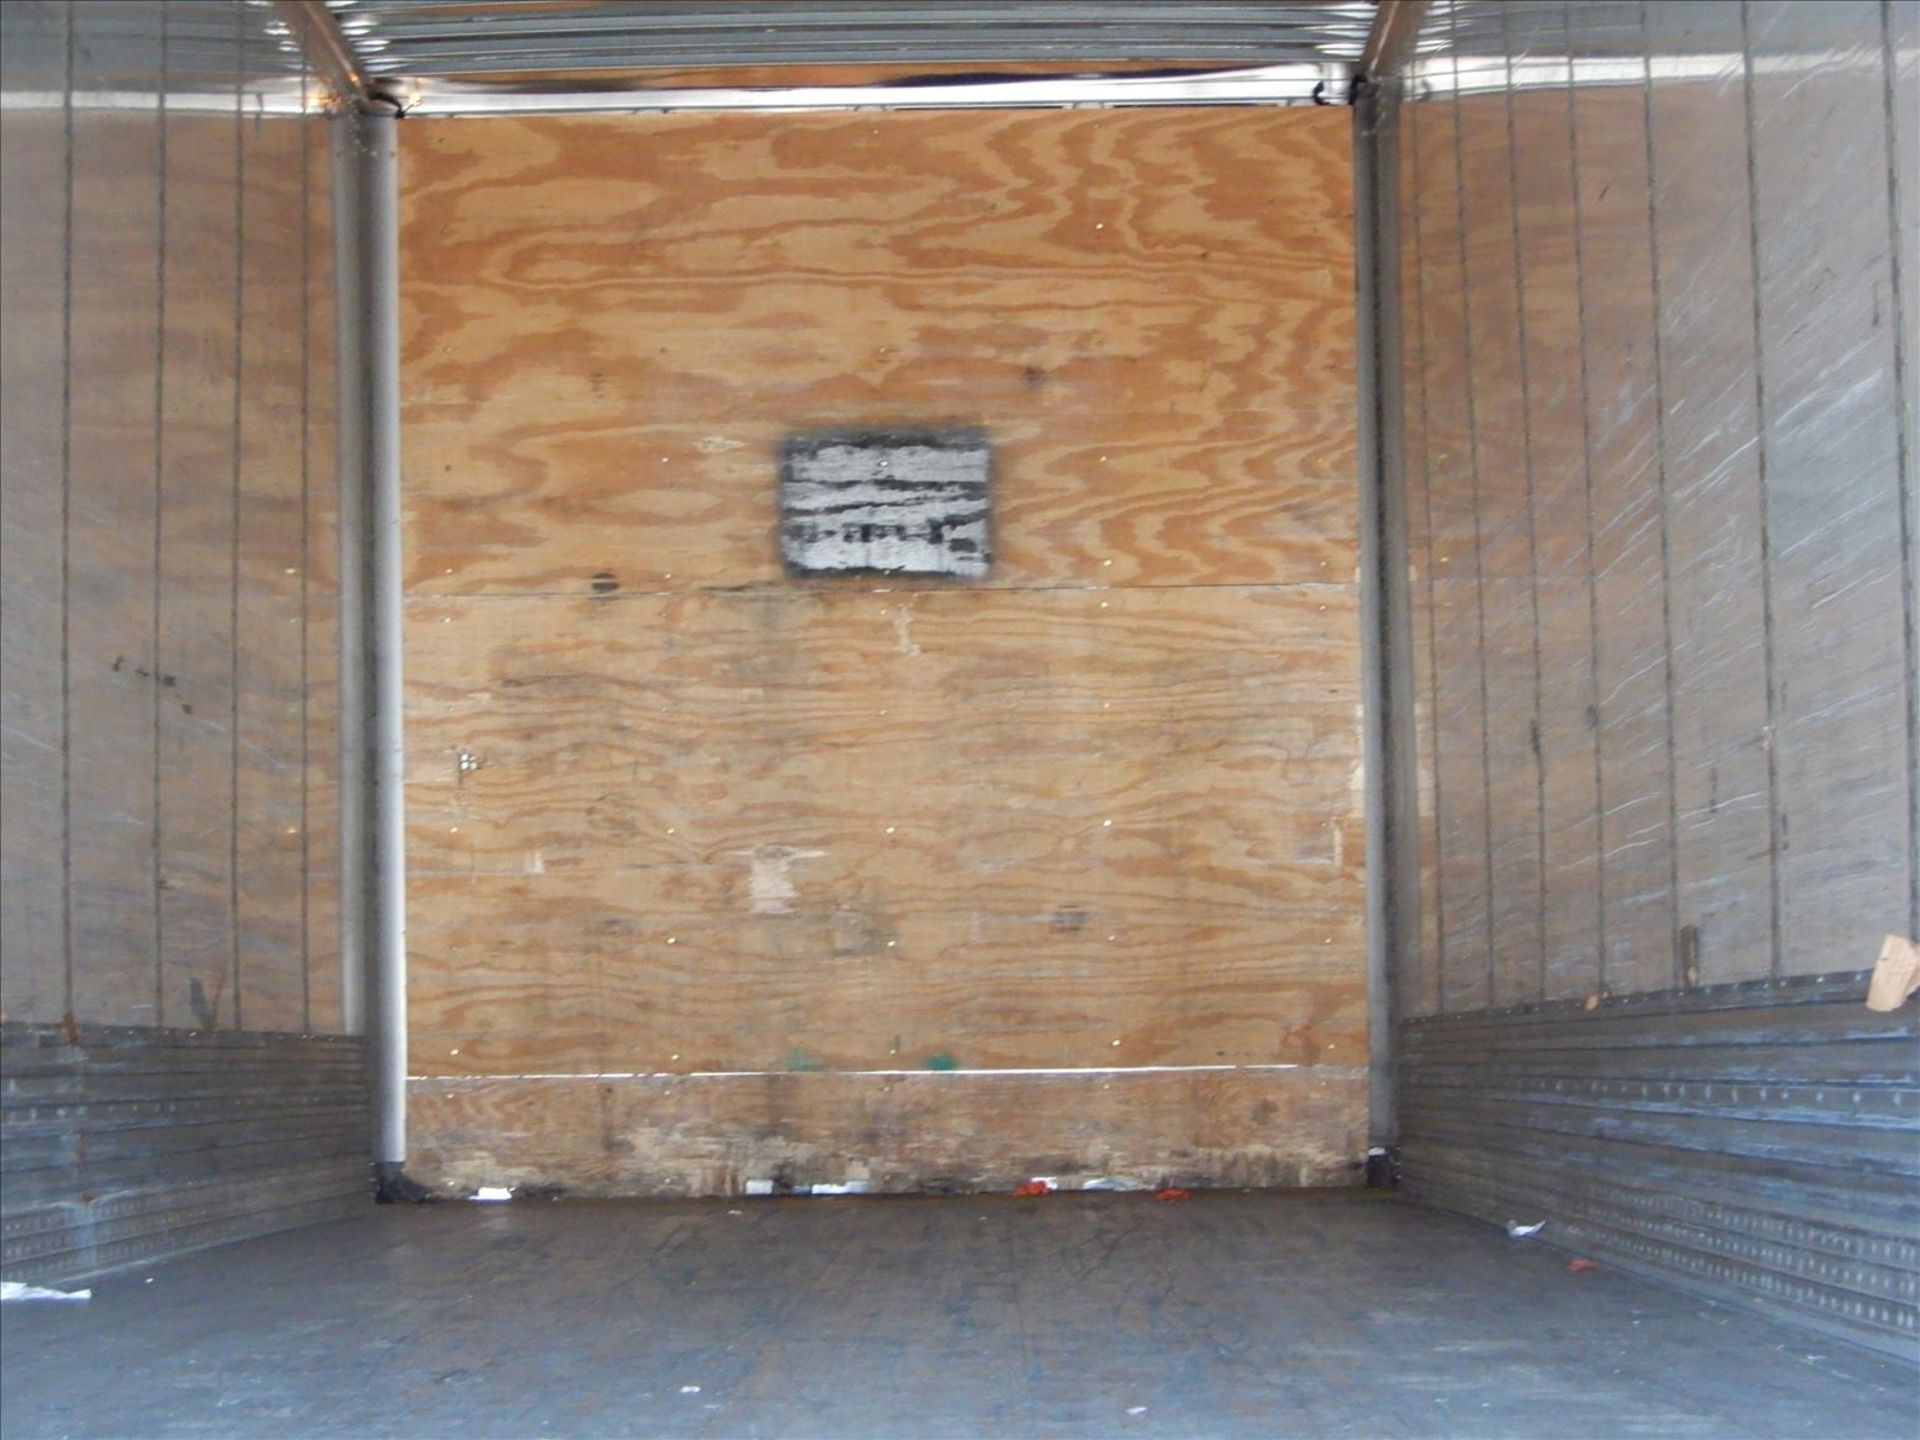 2012 Vanguard Trailer - Located in Indianapolis, IN - Image 25 of 28